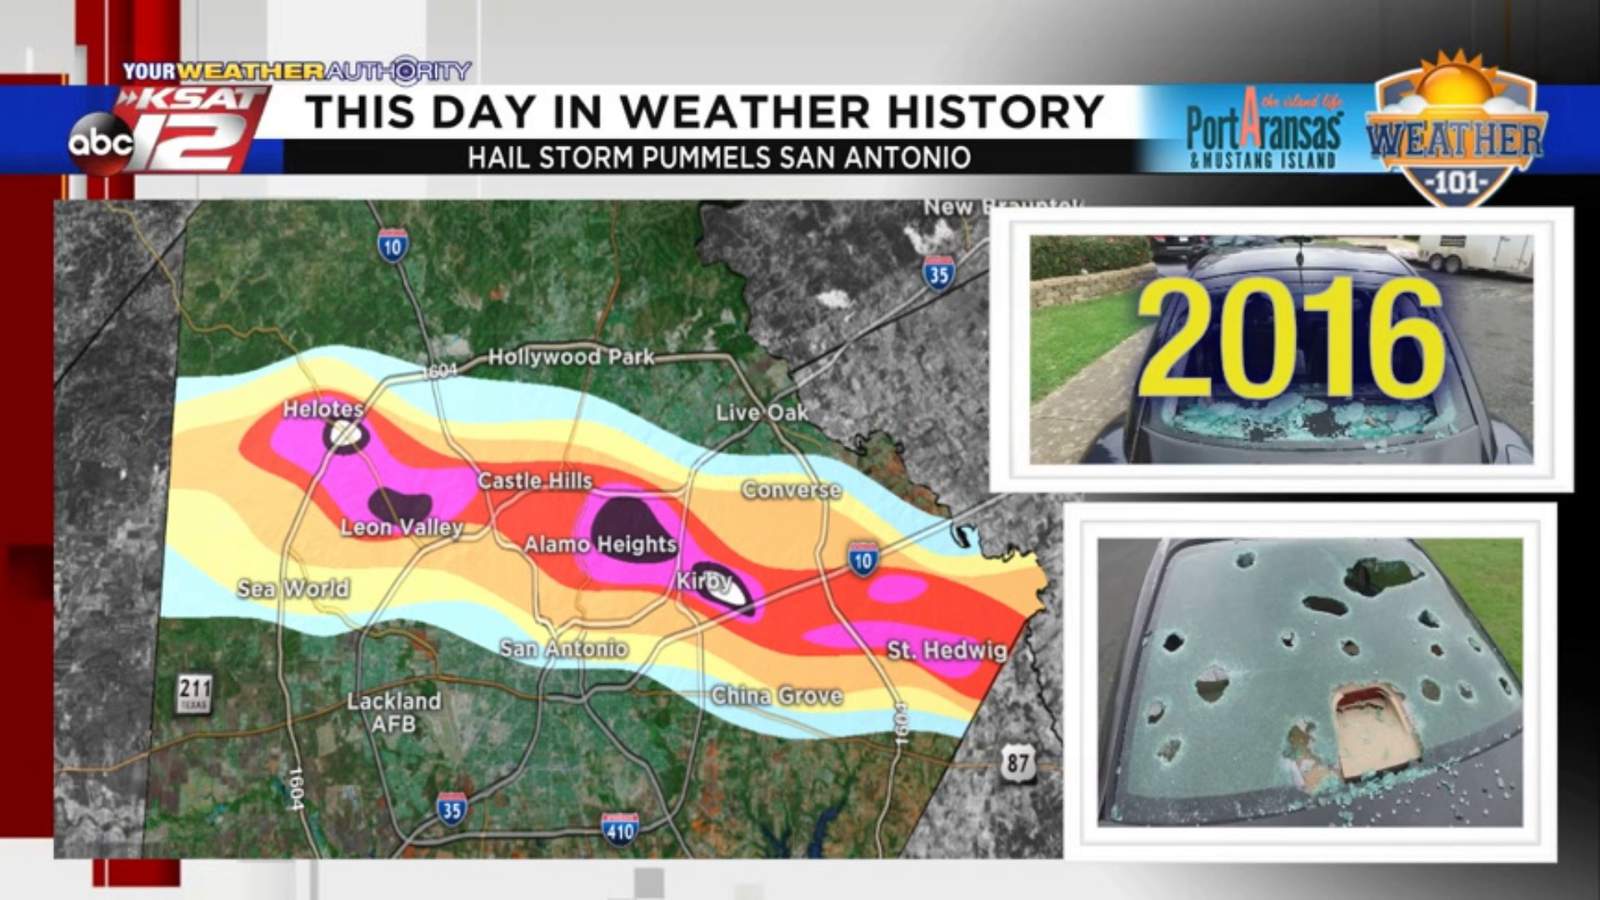 This Day in Weather History: April 12: Massive hail storm hits San Antonio